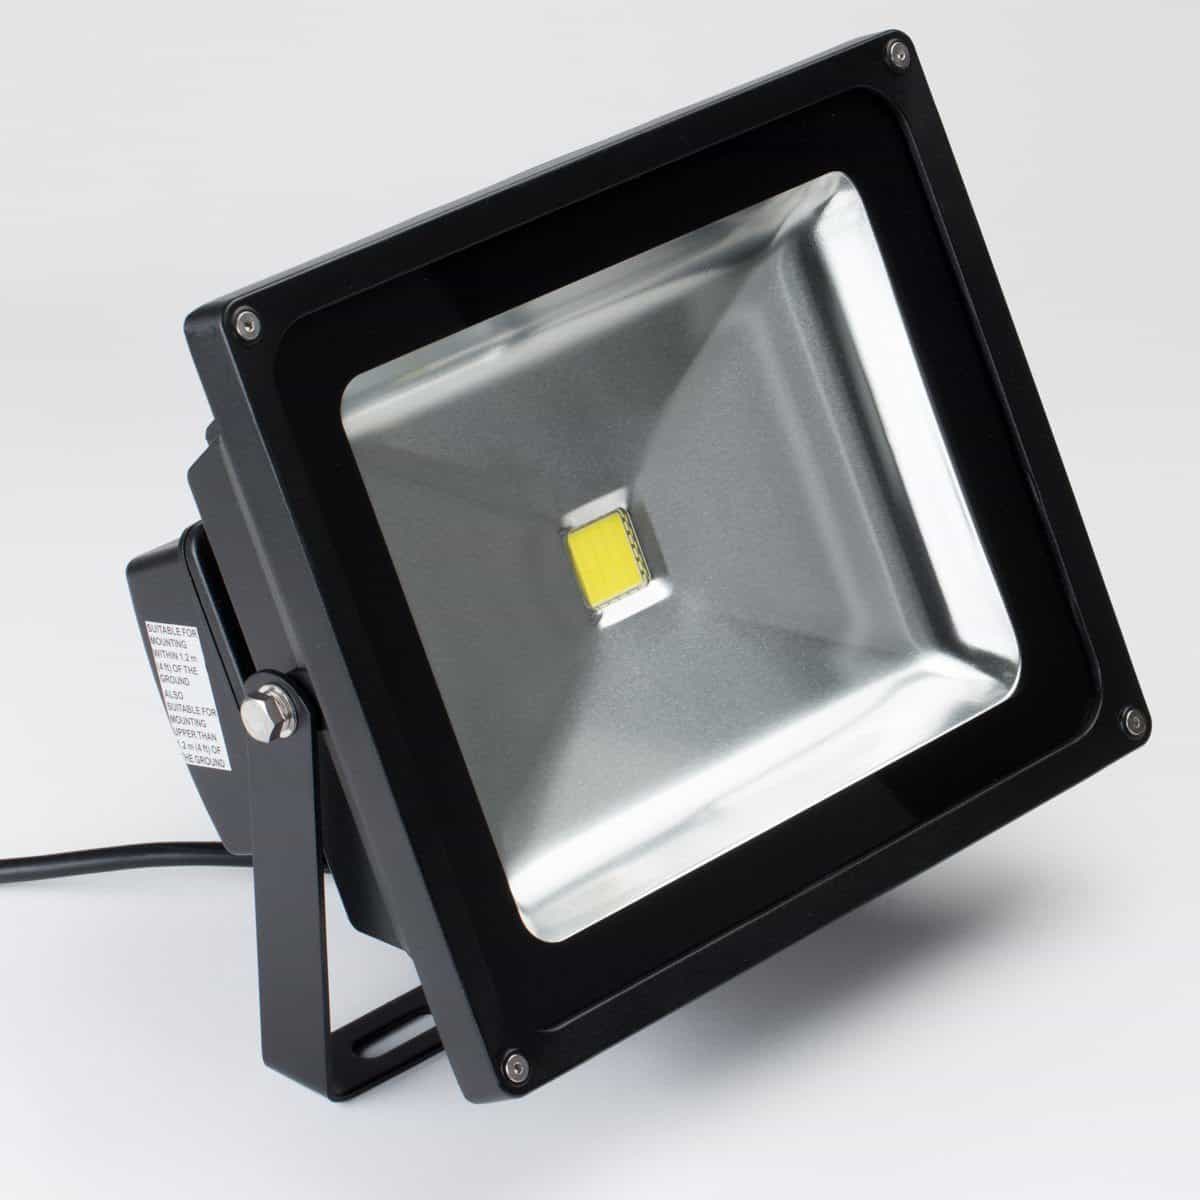 small led flood light in black housing with visible yellow chip in center